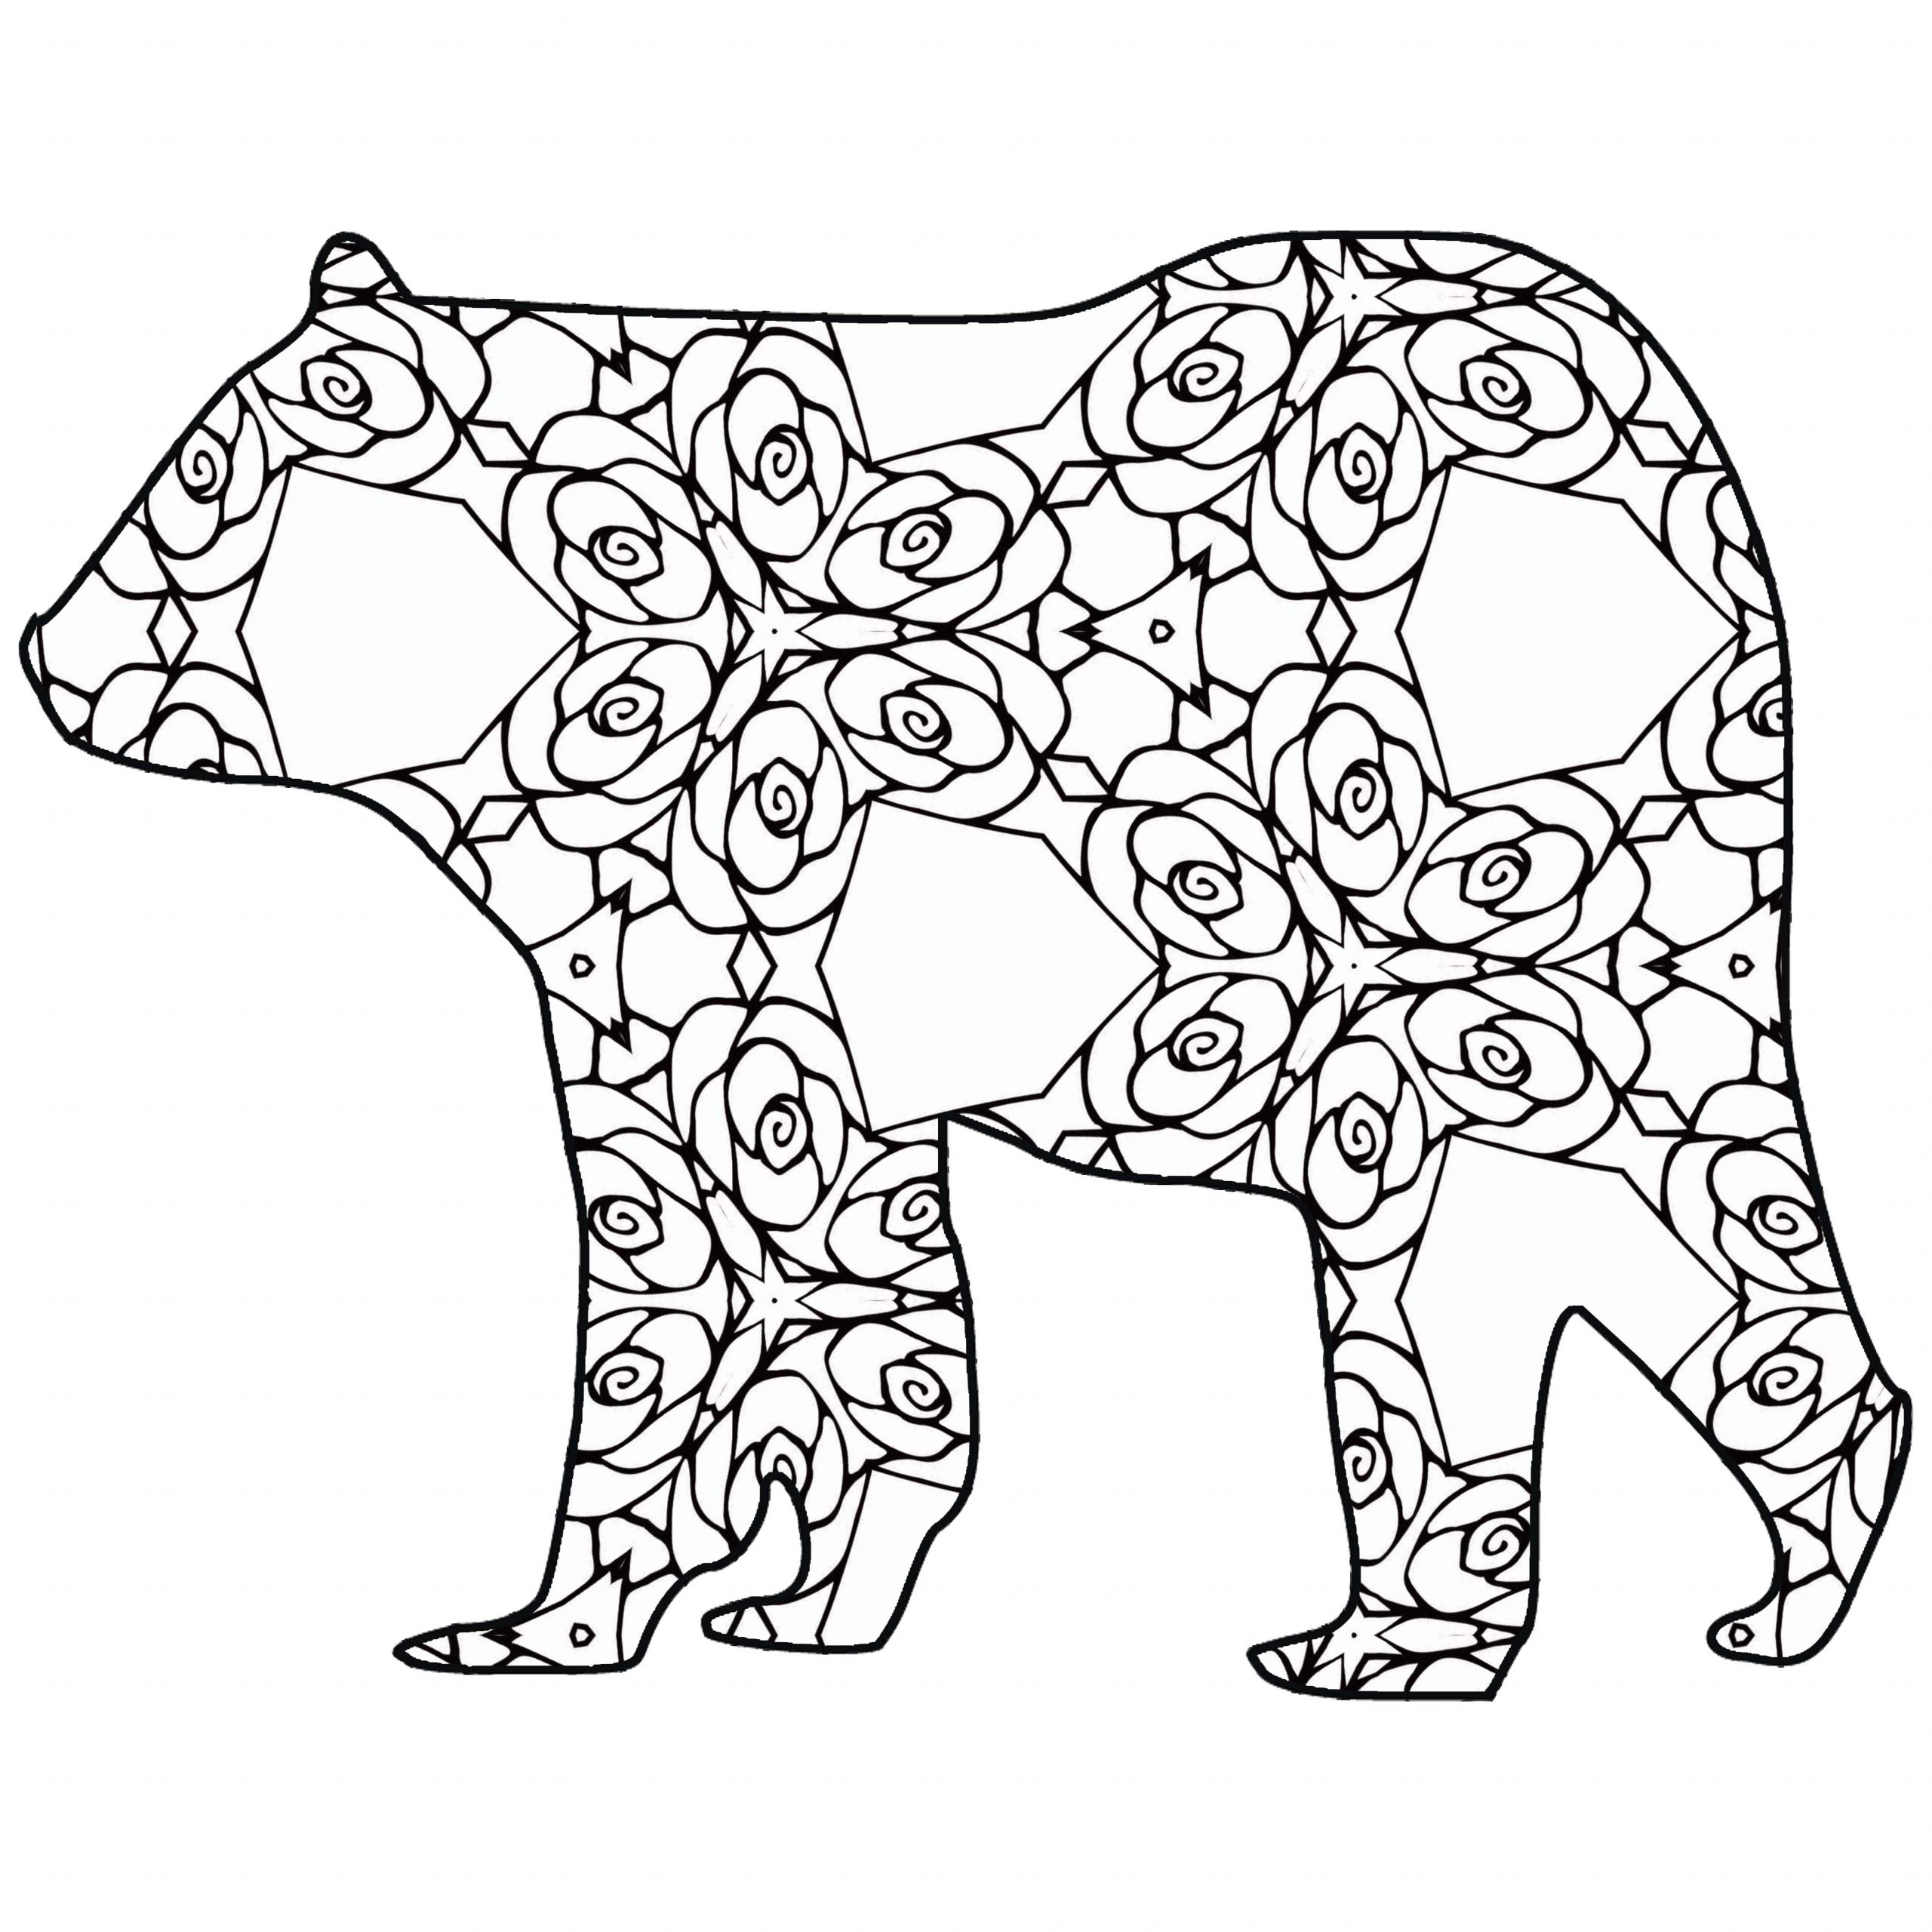 Printable Coloring Pages Animals
 30 Free Coloring Pages A Geometric Animal Coloring